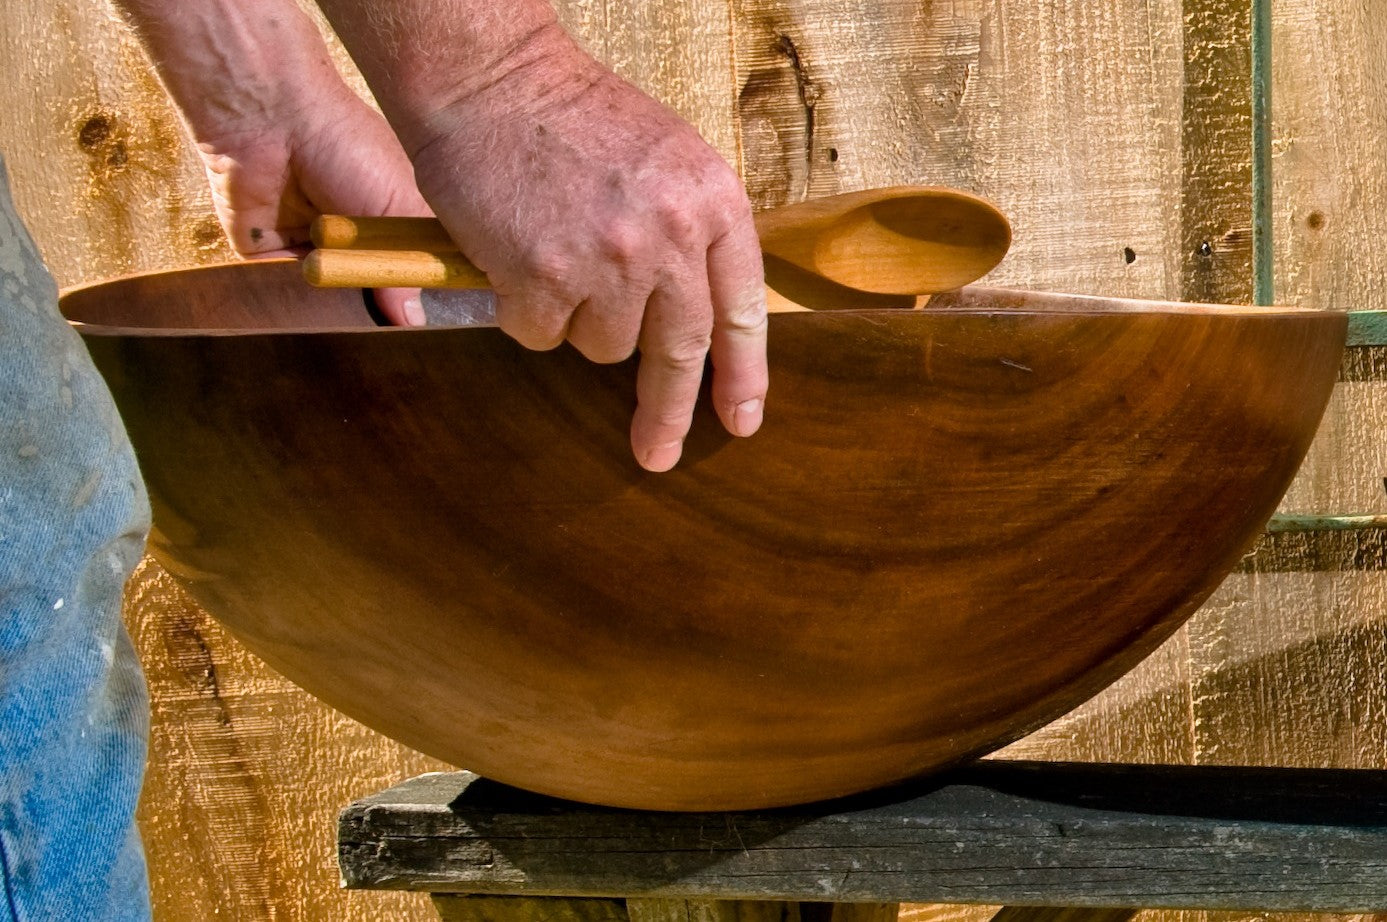 Wooden Salad Bowl Largest Handmade Bowl in the World 19.5